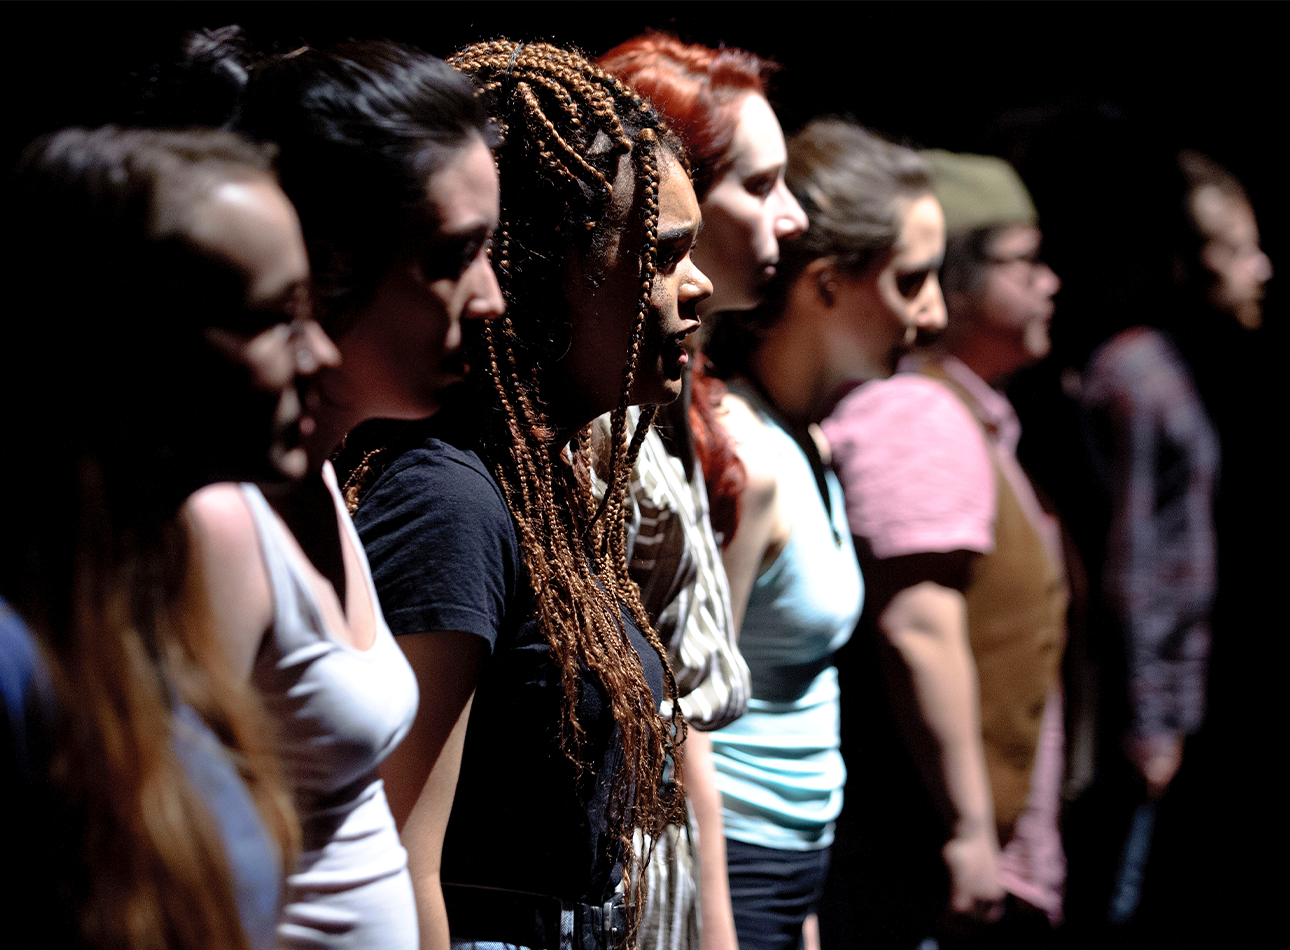 Various women in casual clothing stood in a line on stage.